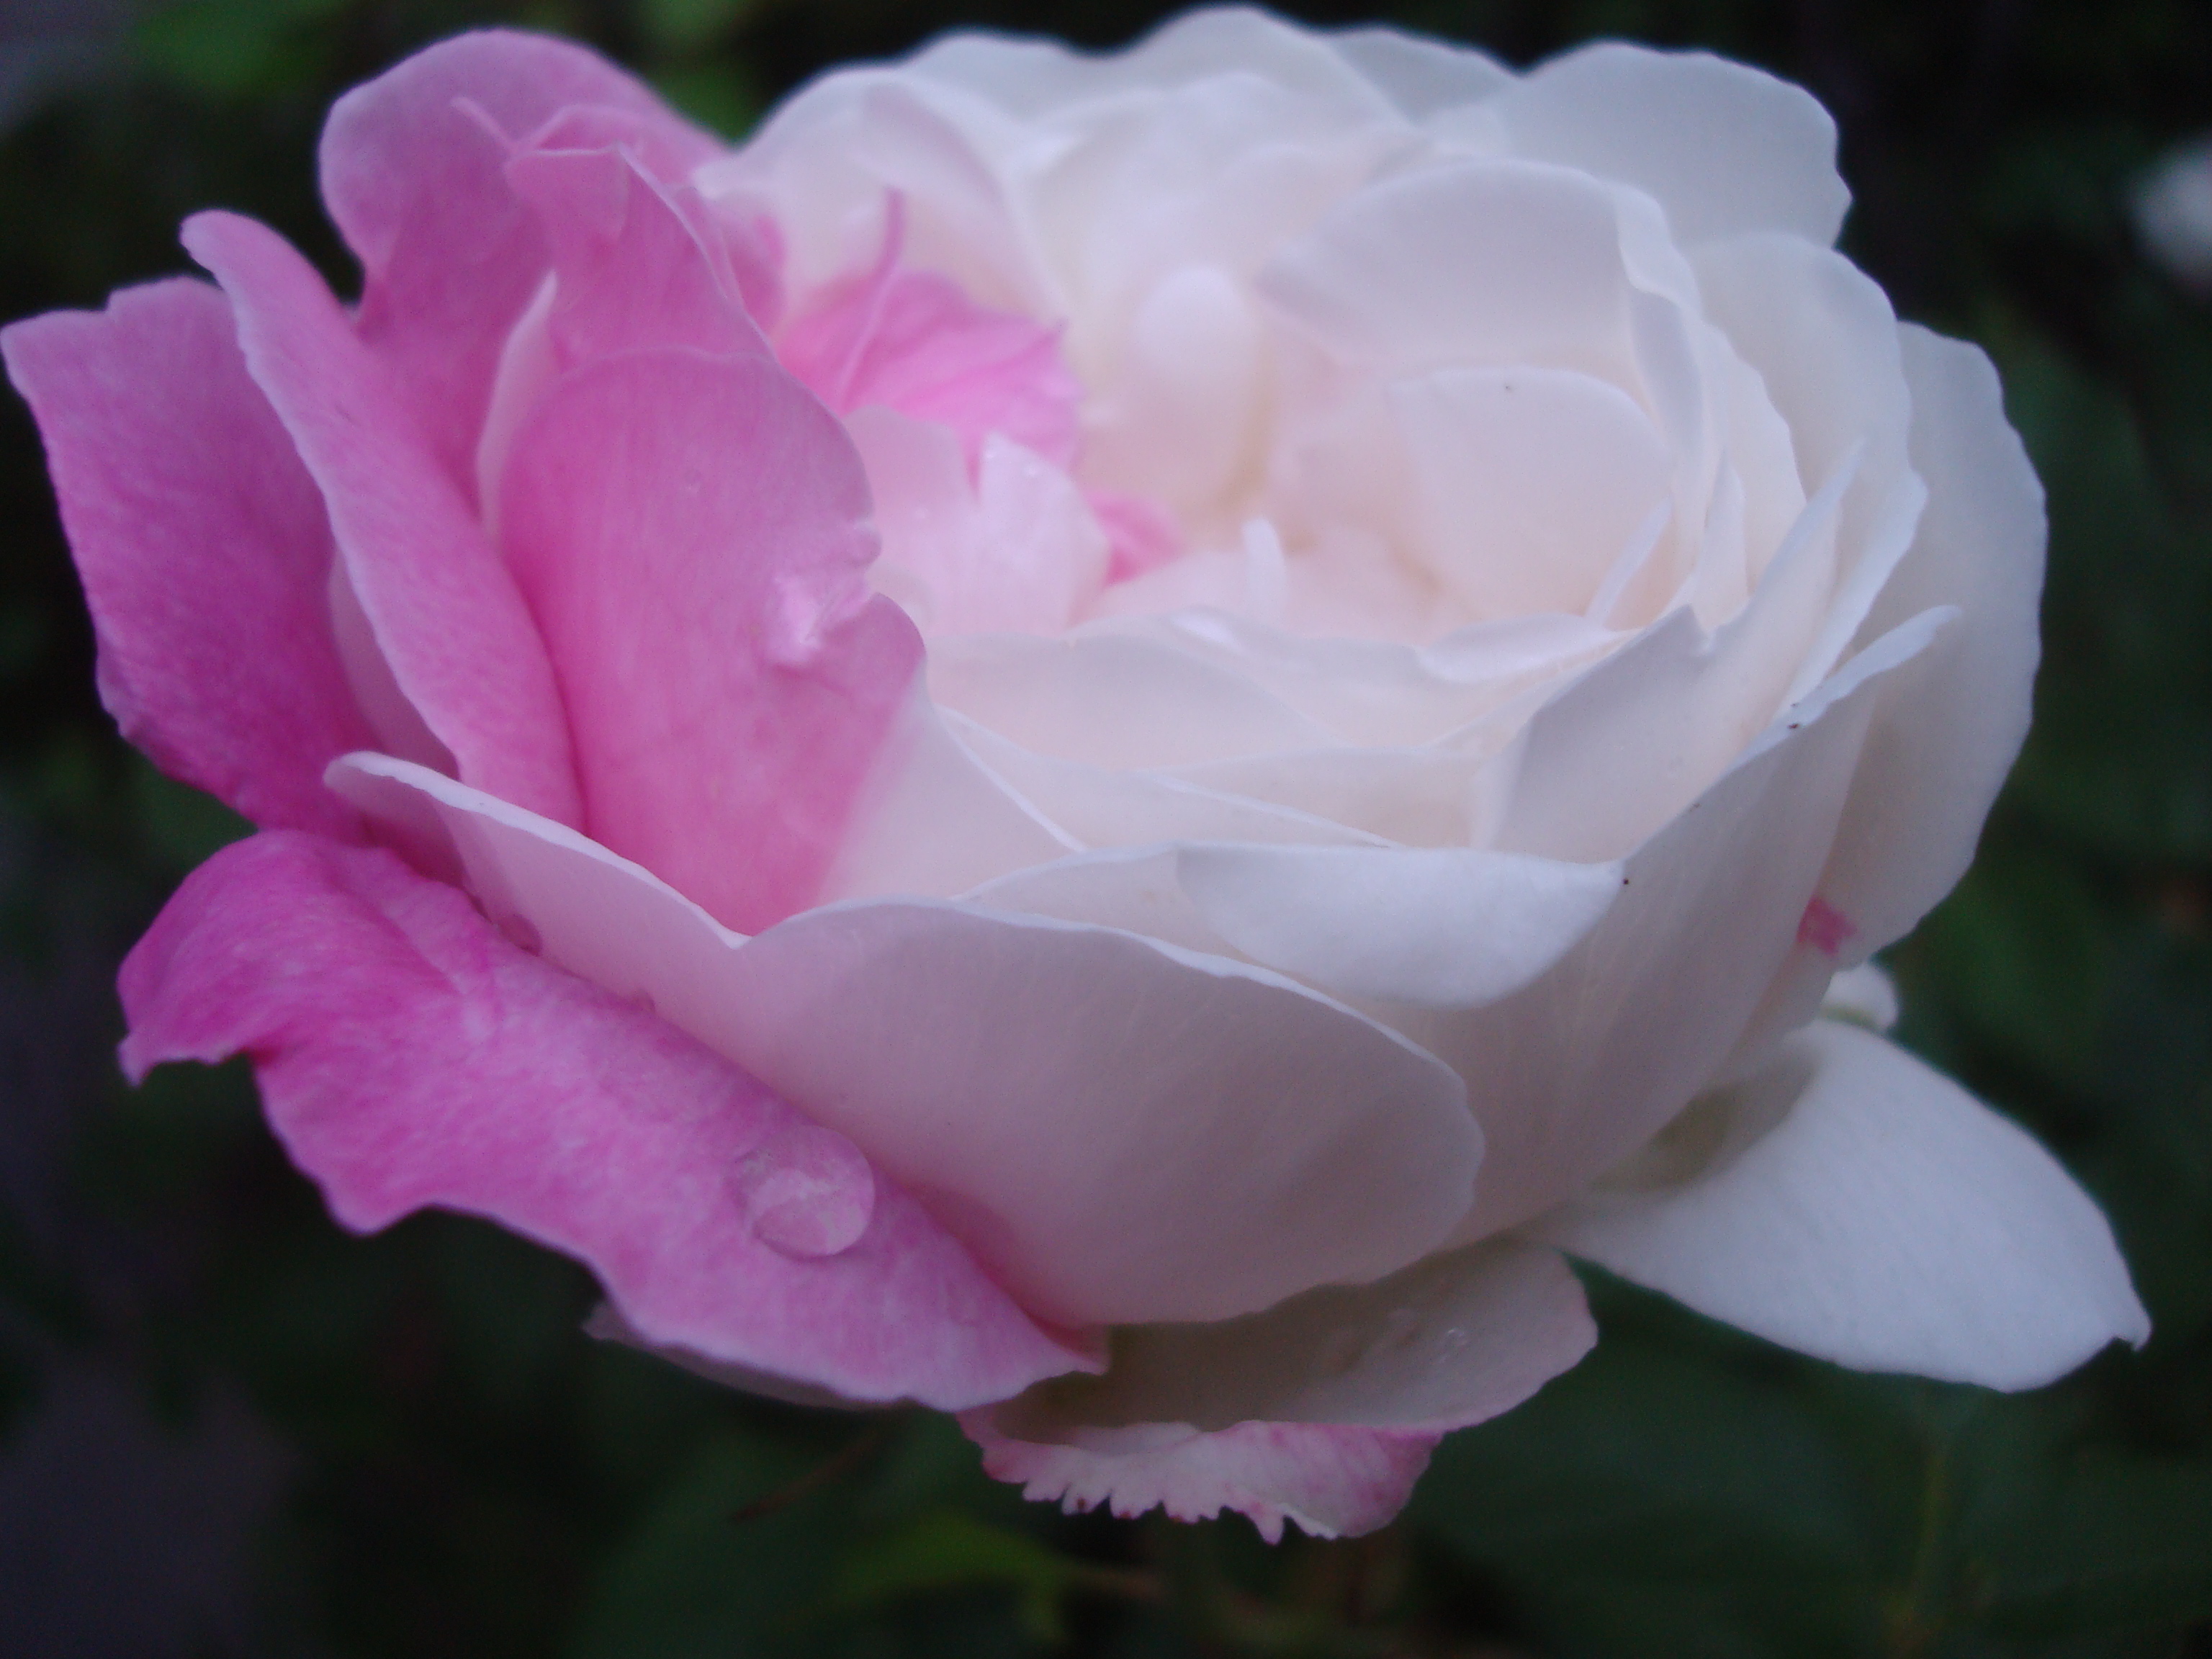 Pink and white rose photo